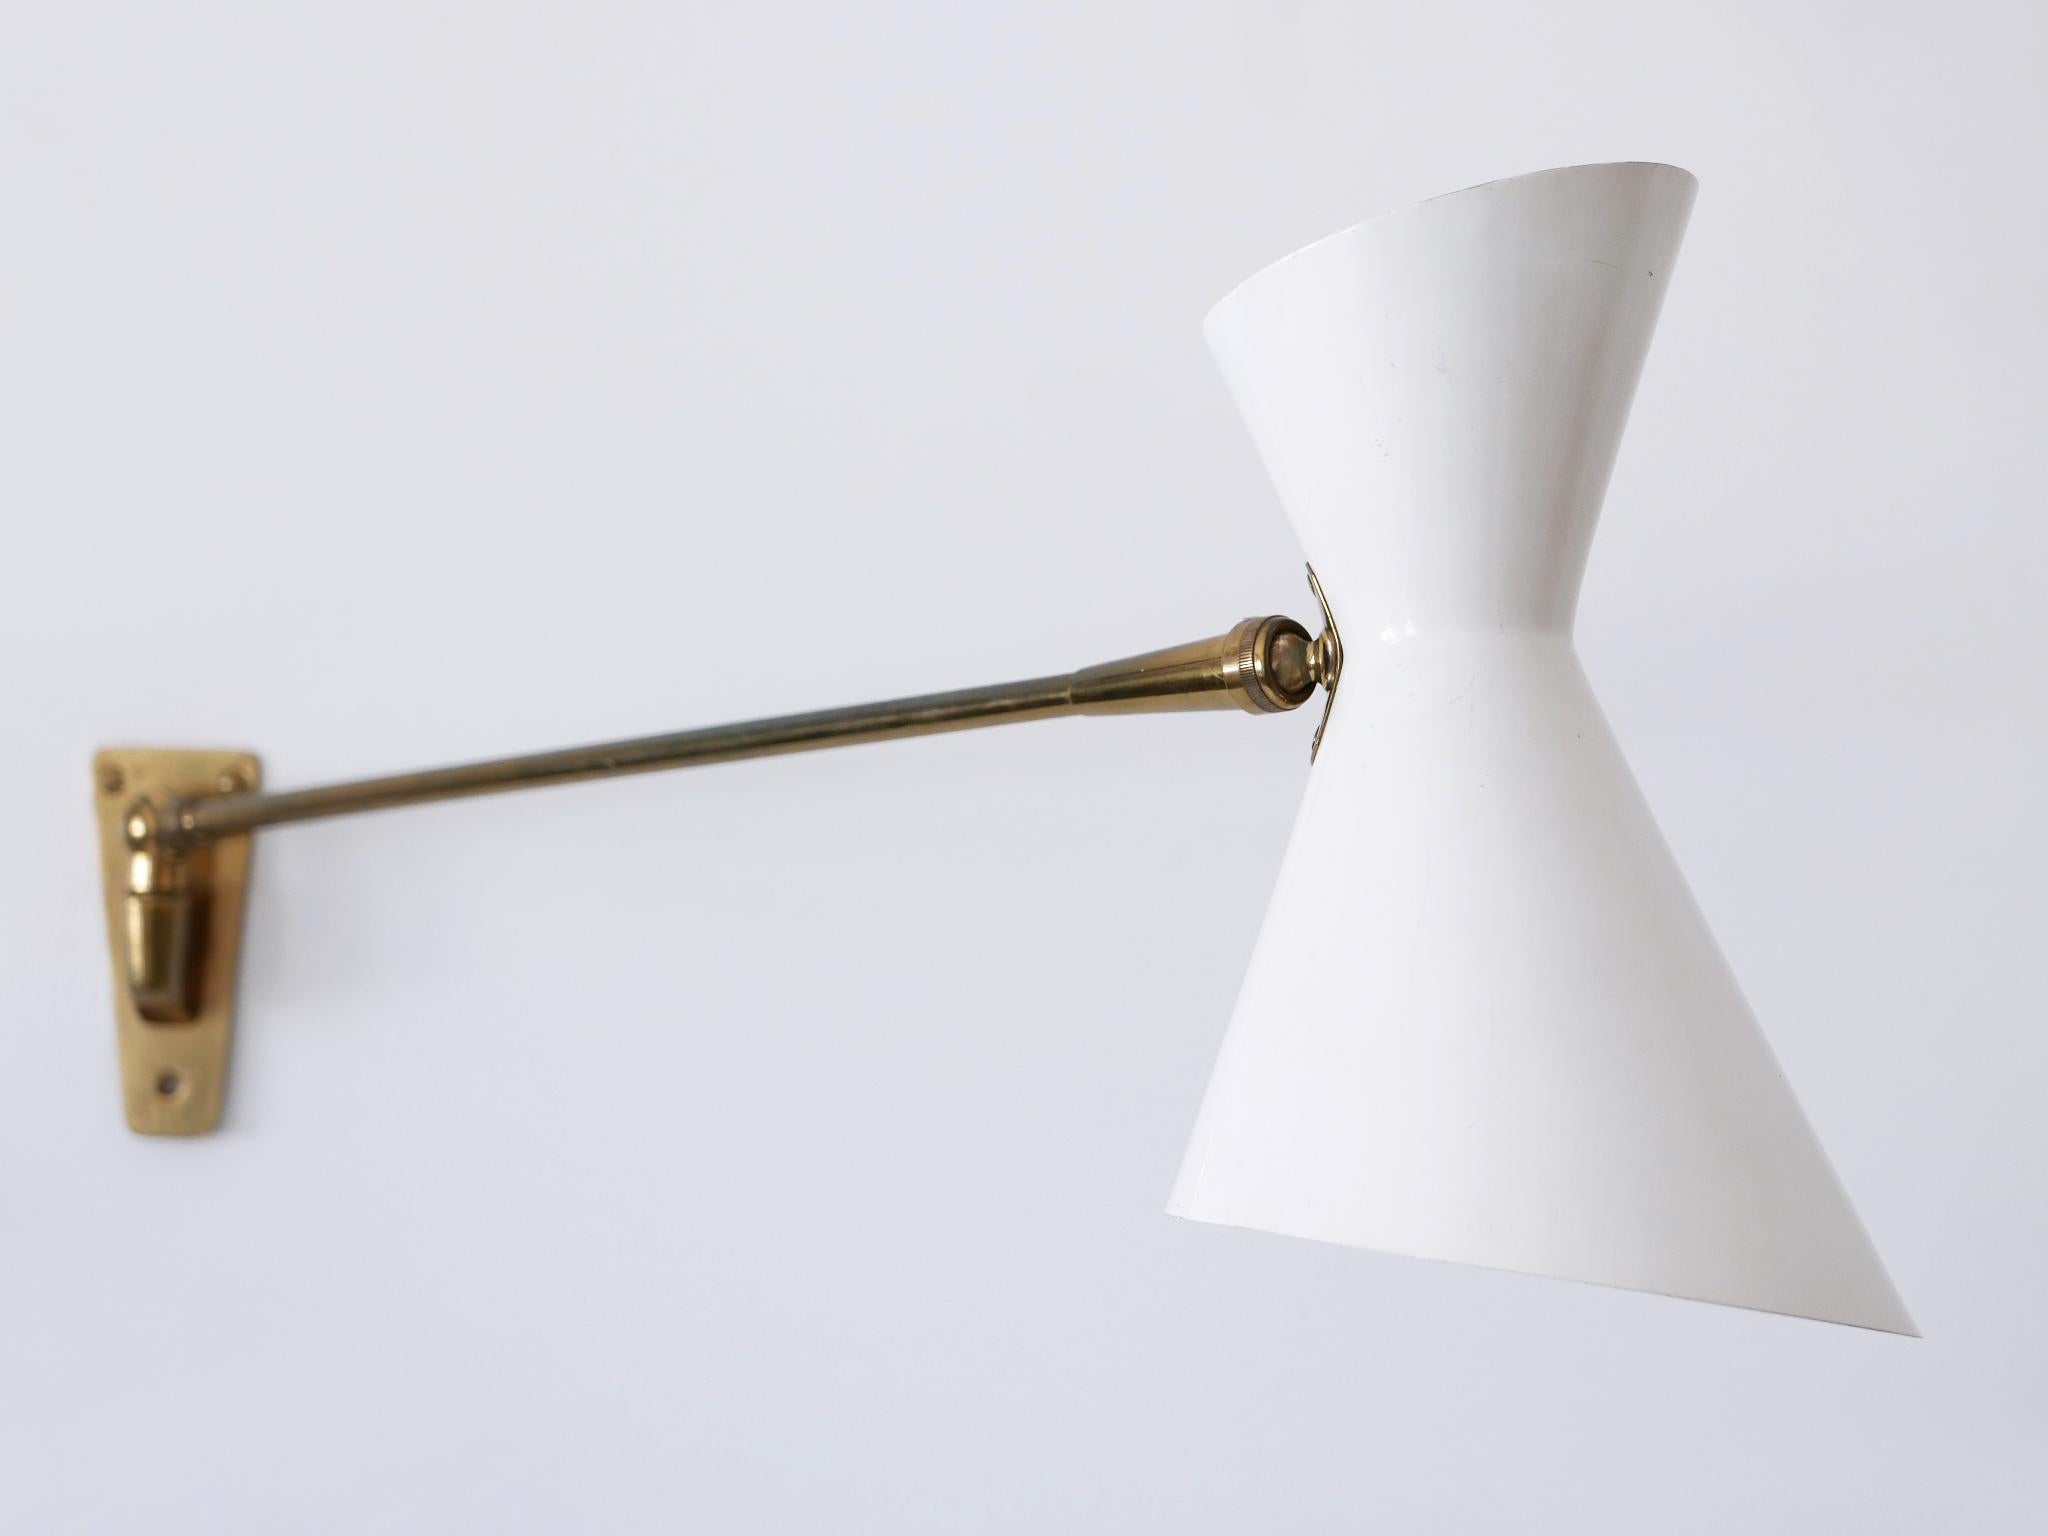 Elegant Mid Century Articulated Diabolo Wall Lamp by Belmag Switzerland 1950s For Sale 5